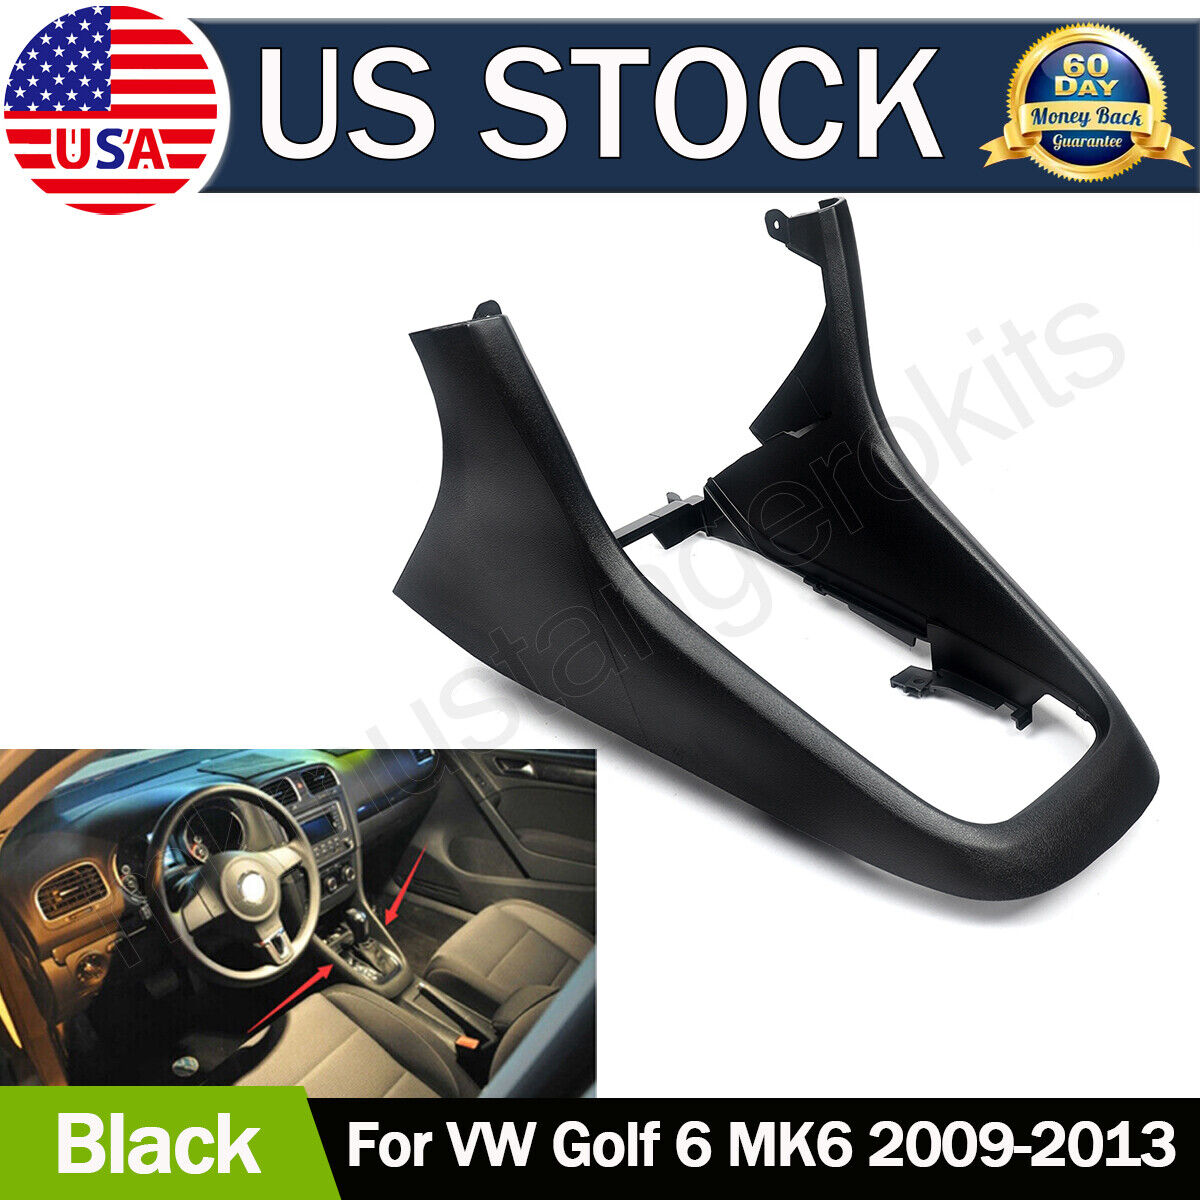 For VW Golf 6 MK6 09-2013 Center Console Cover Frame Replacement 5k0863680 Black